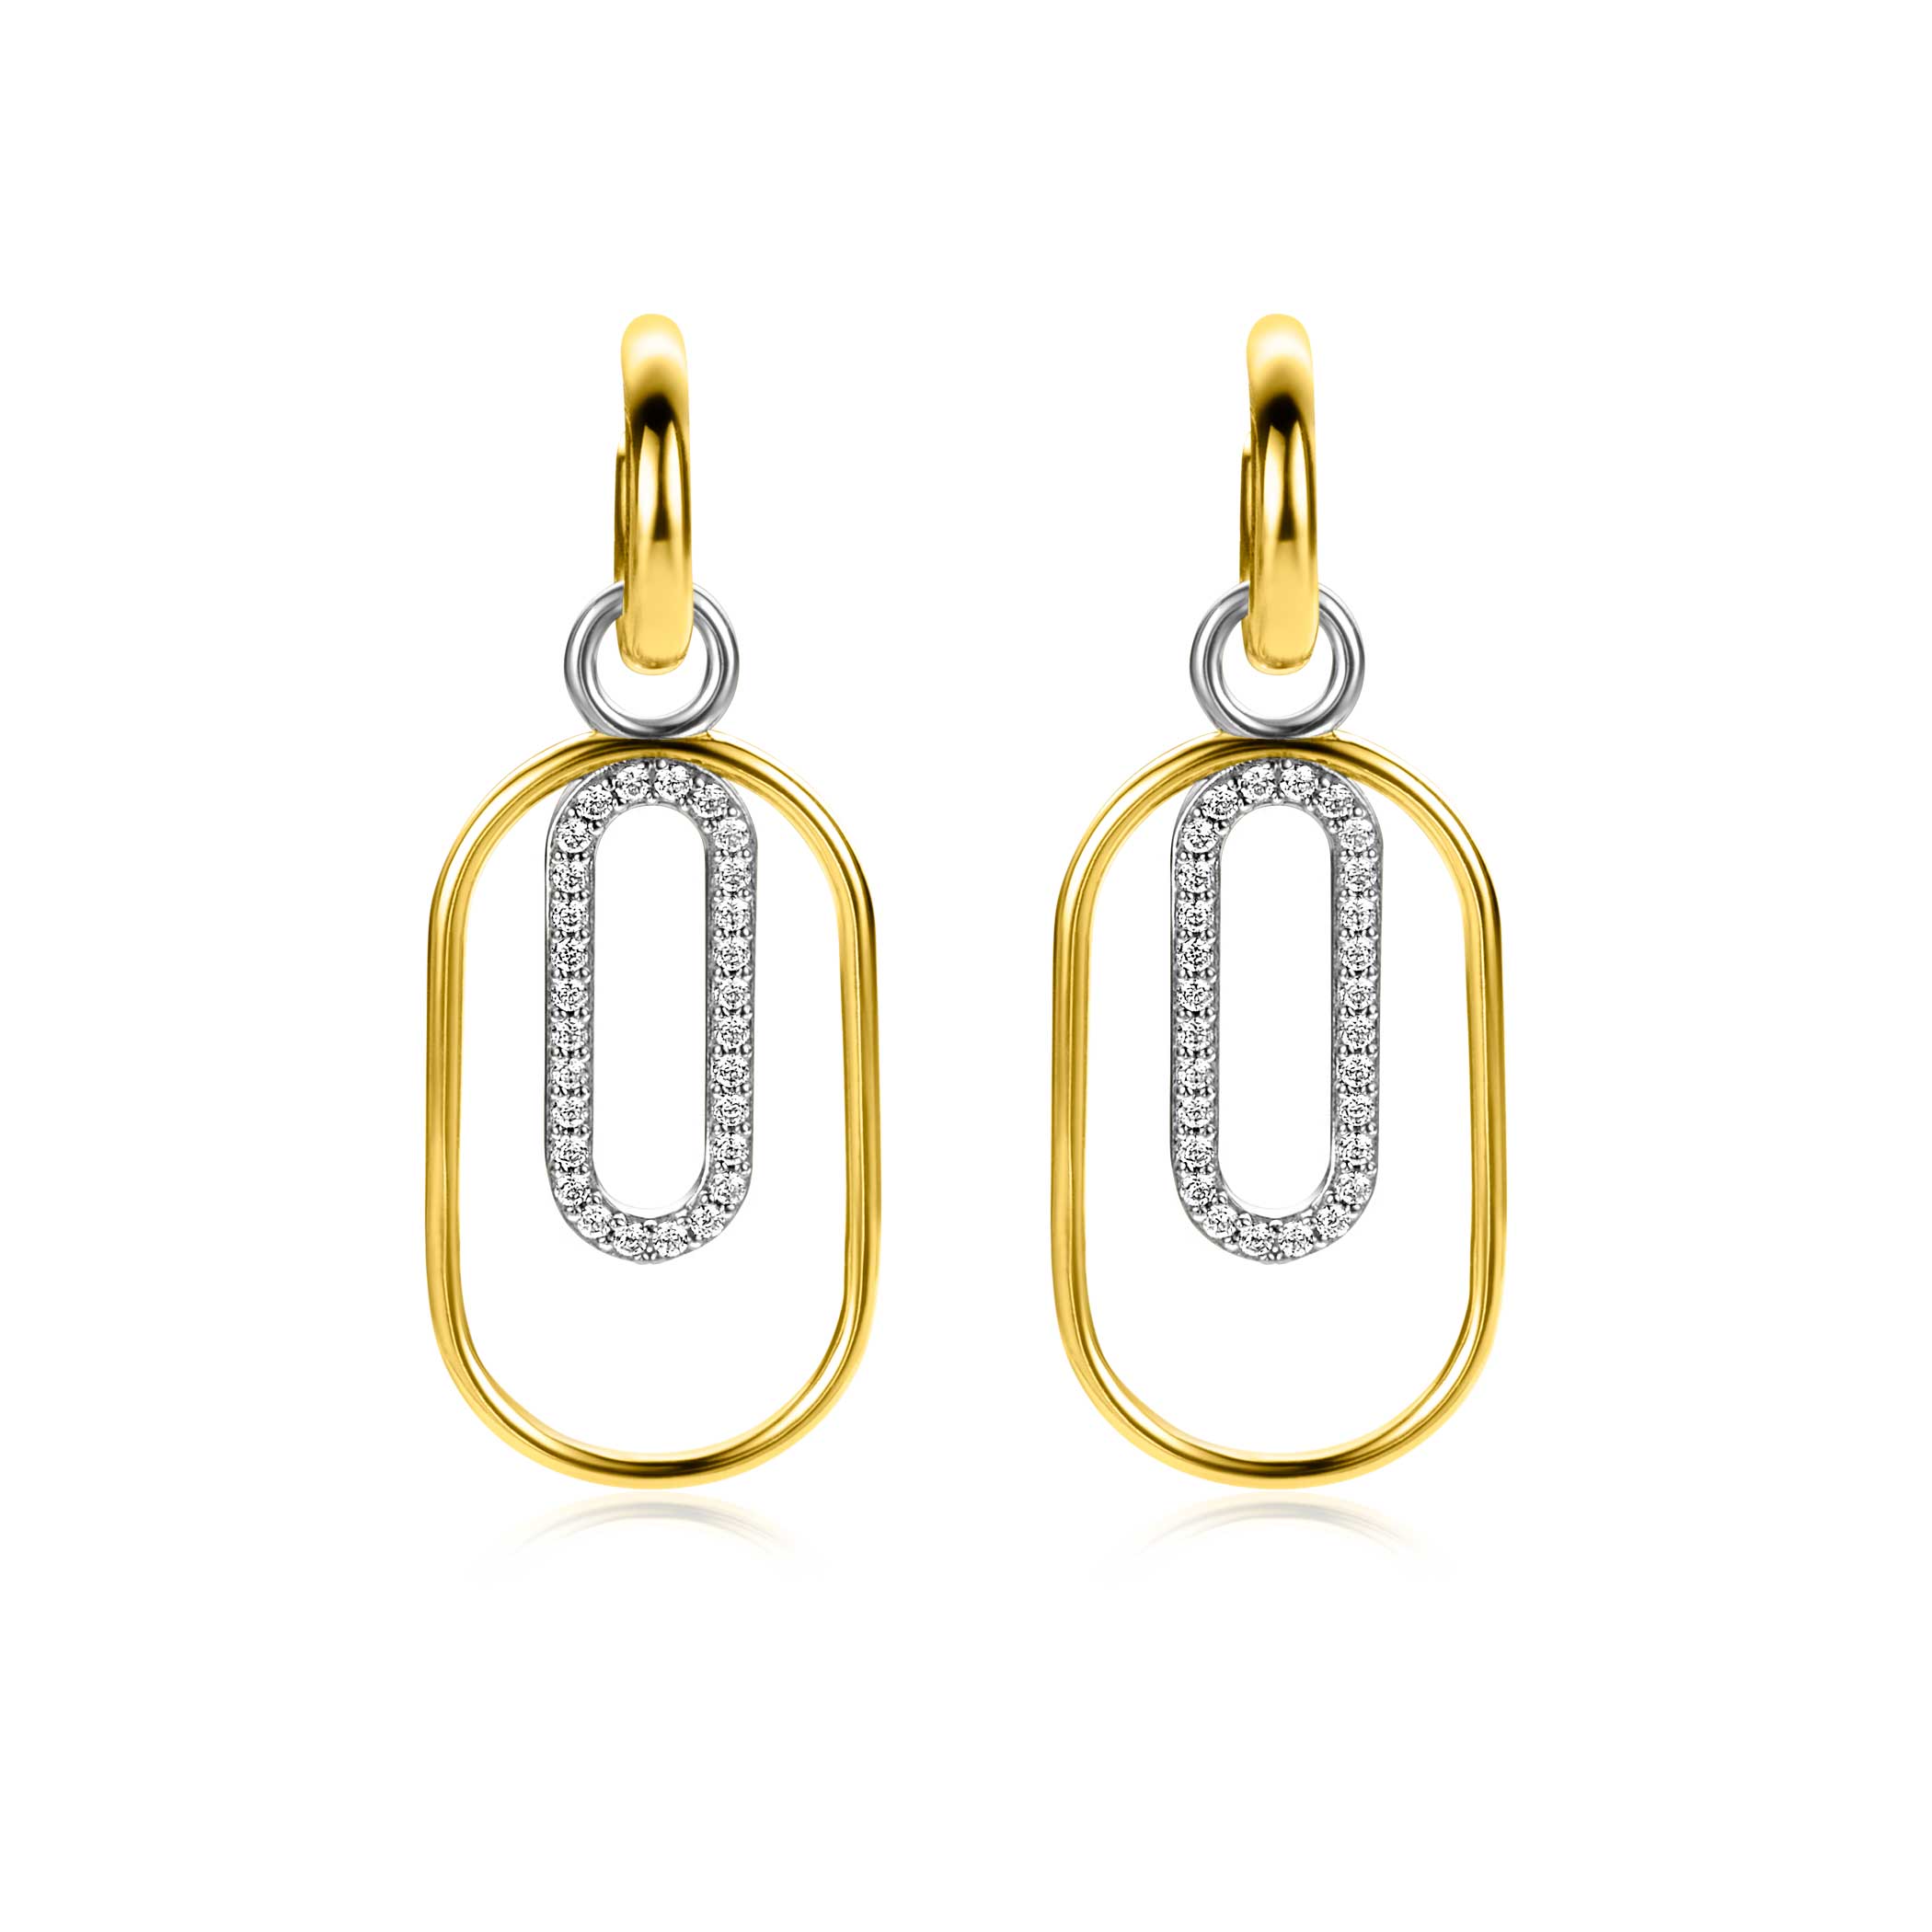 32mm ZINZI Gold Plated Sterling Silver Oval Earrings Pendants Set with White Zirconias ZICH2329 (excl. hoop earrings)